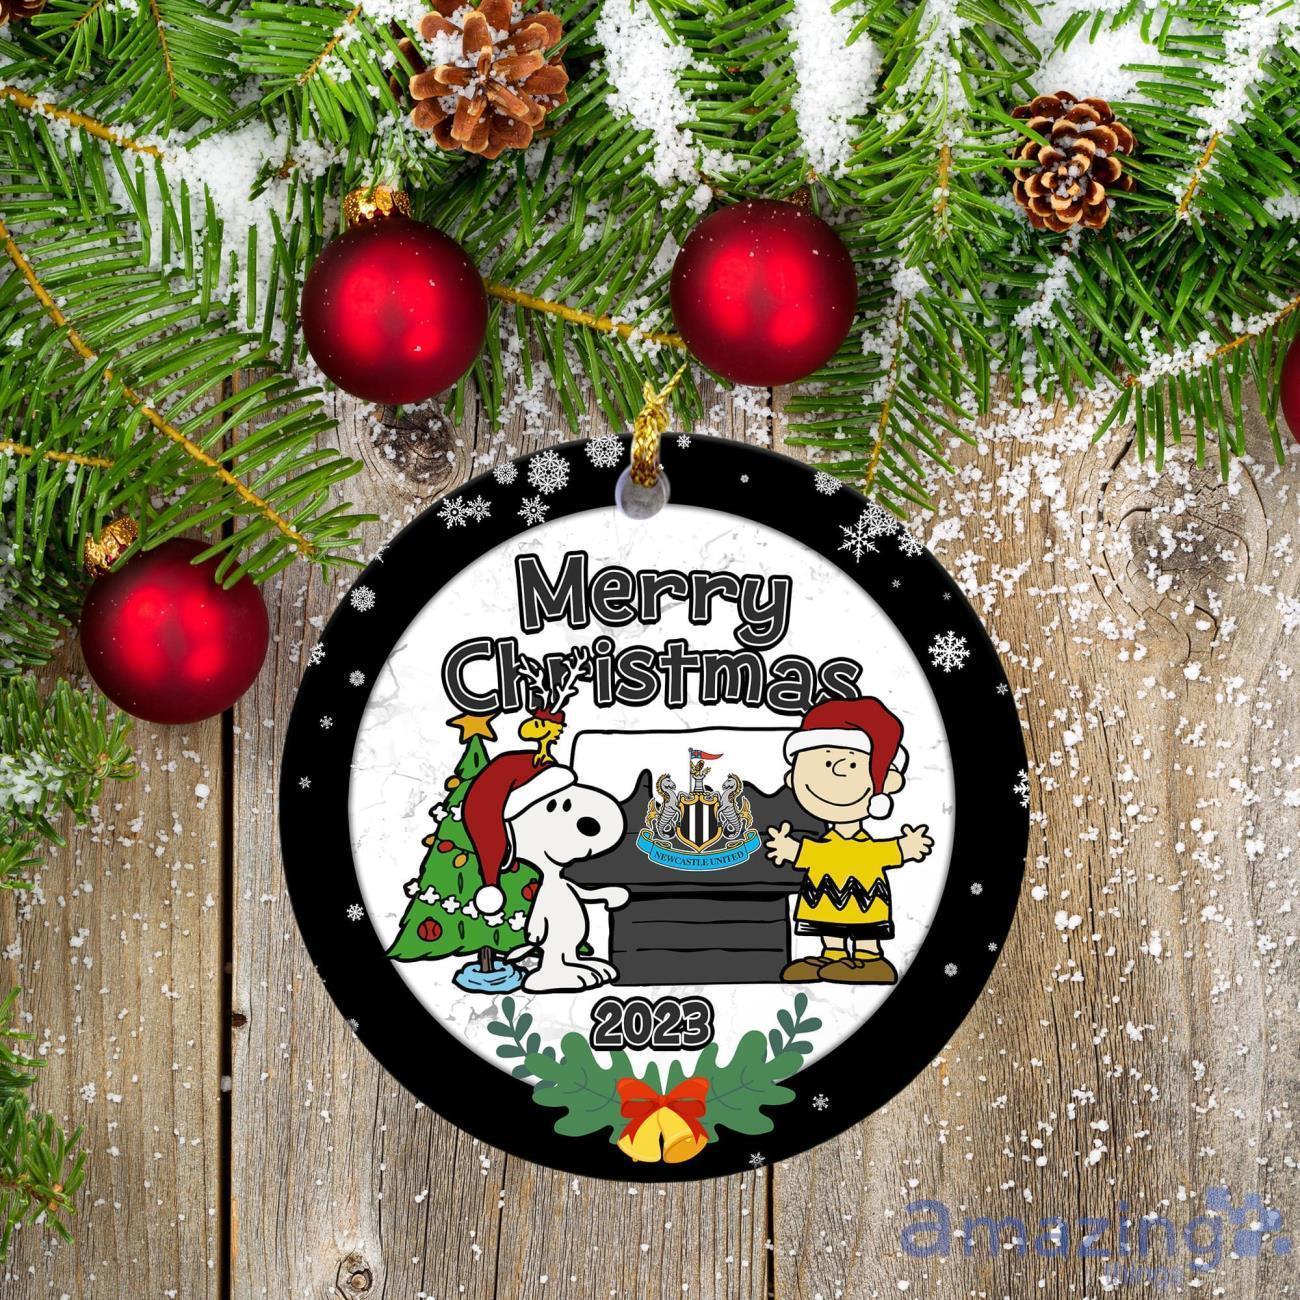 Snoopy And Woodstock Christmas Gift For Fans Vegas Golden Knights